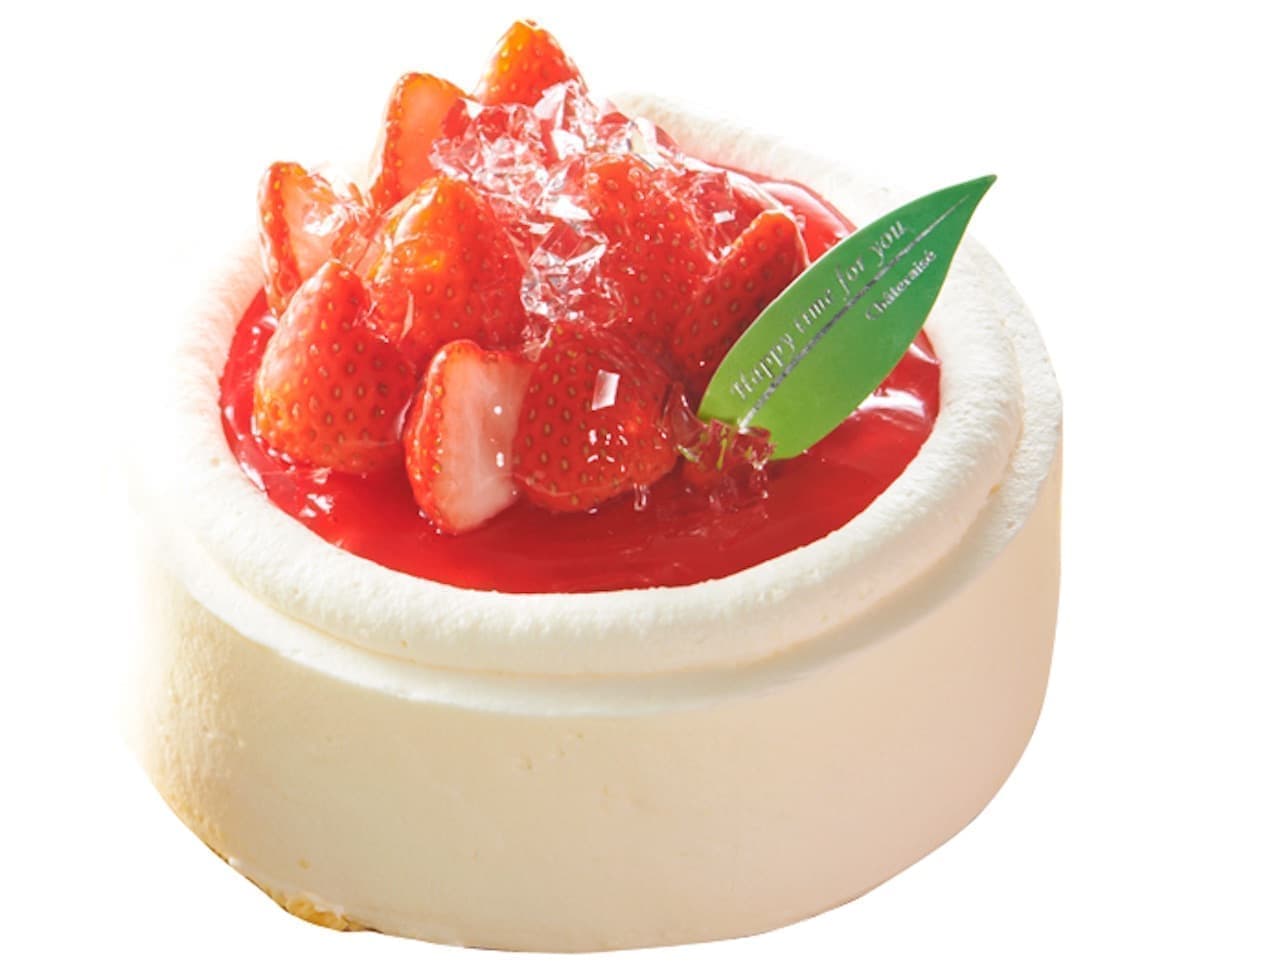 Chateraise "Summer Strawberry Souffle Cheese Decoration"